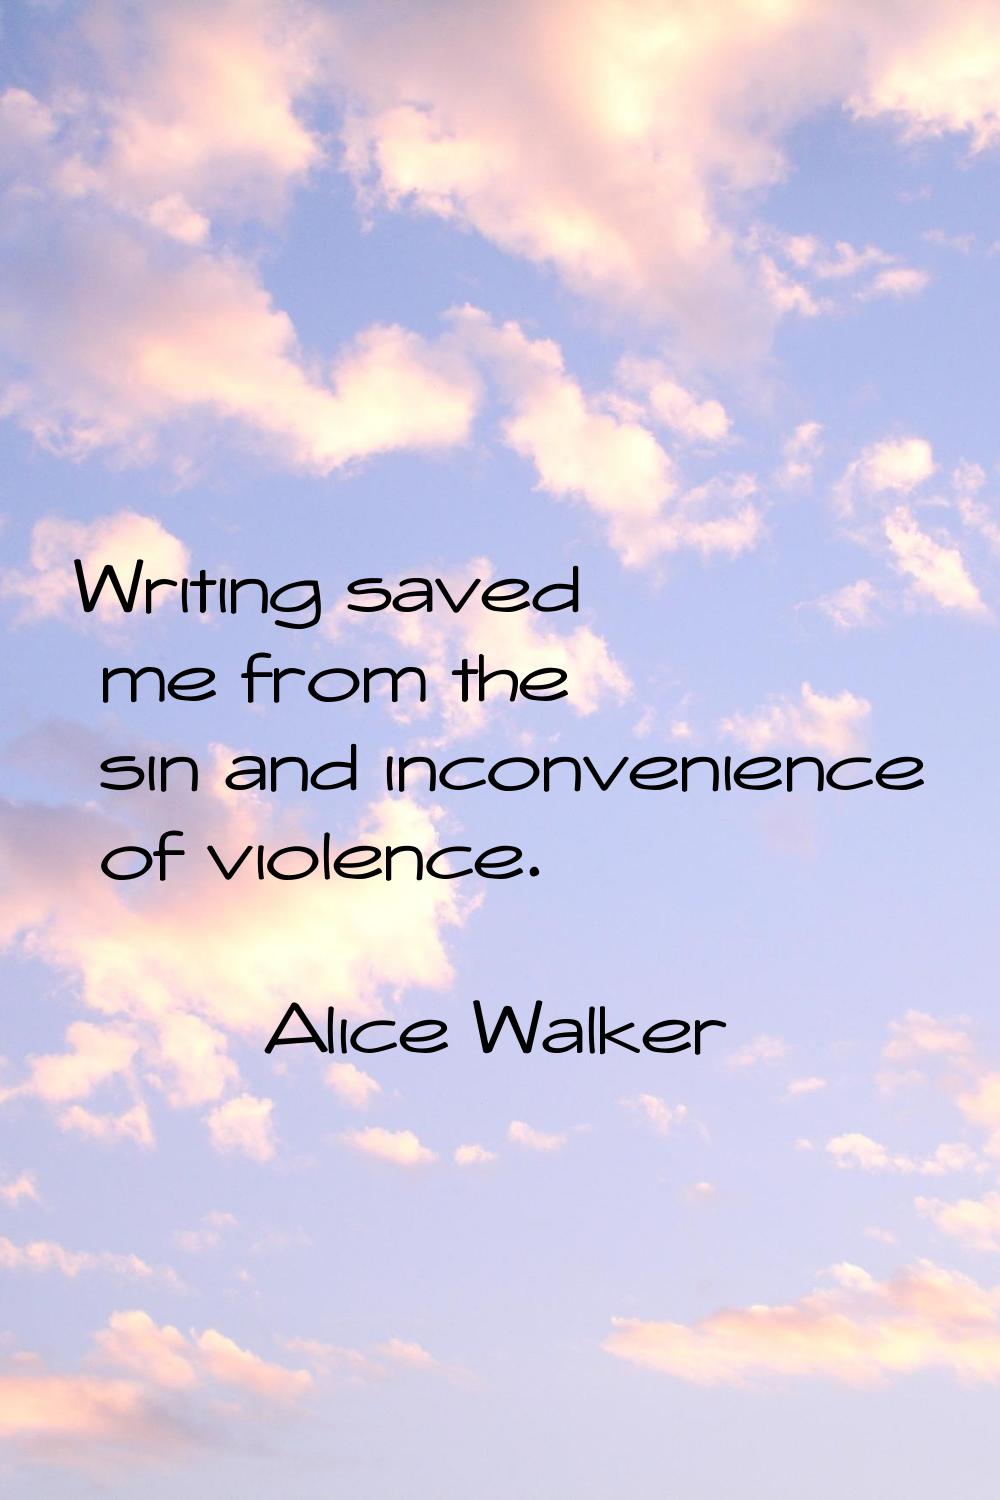 Writing saved me from the sin and inconvenience of violence.